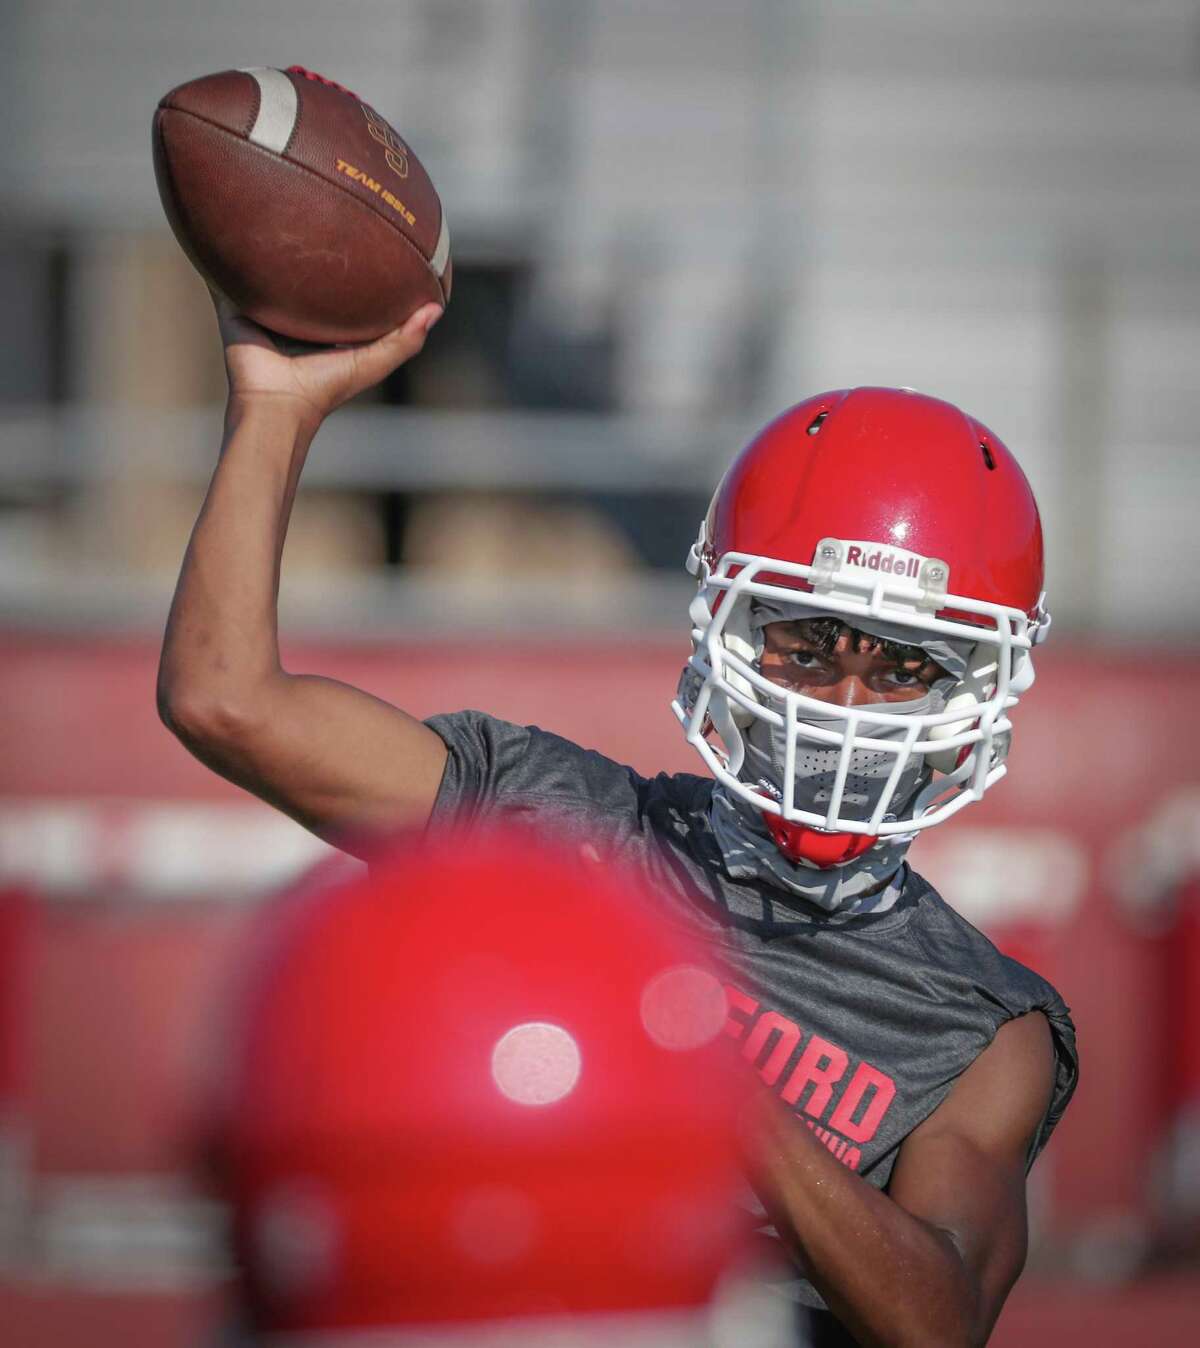 Stafford High School freshman quarterback Brytan Buckner passes during the first day of high school football practice, which is only taking place at a select number of schools in the Houston area Monday, Aug. 3, 2020, in Stafford.